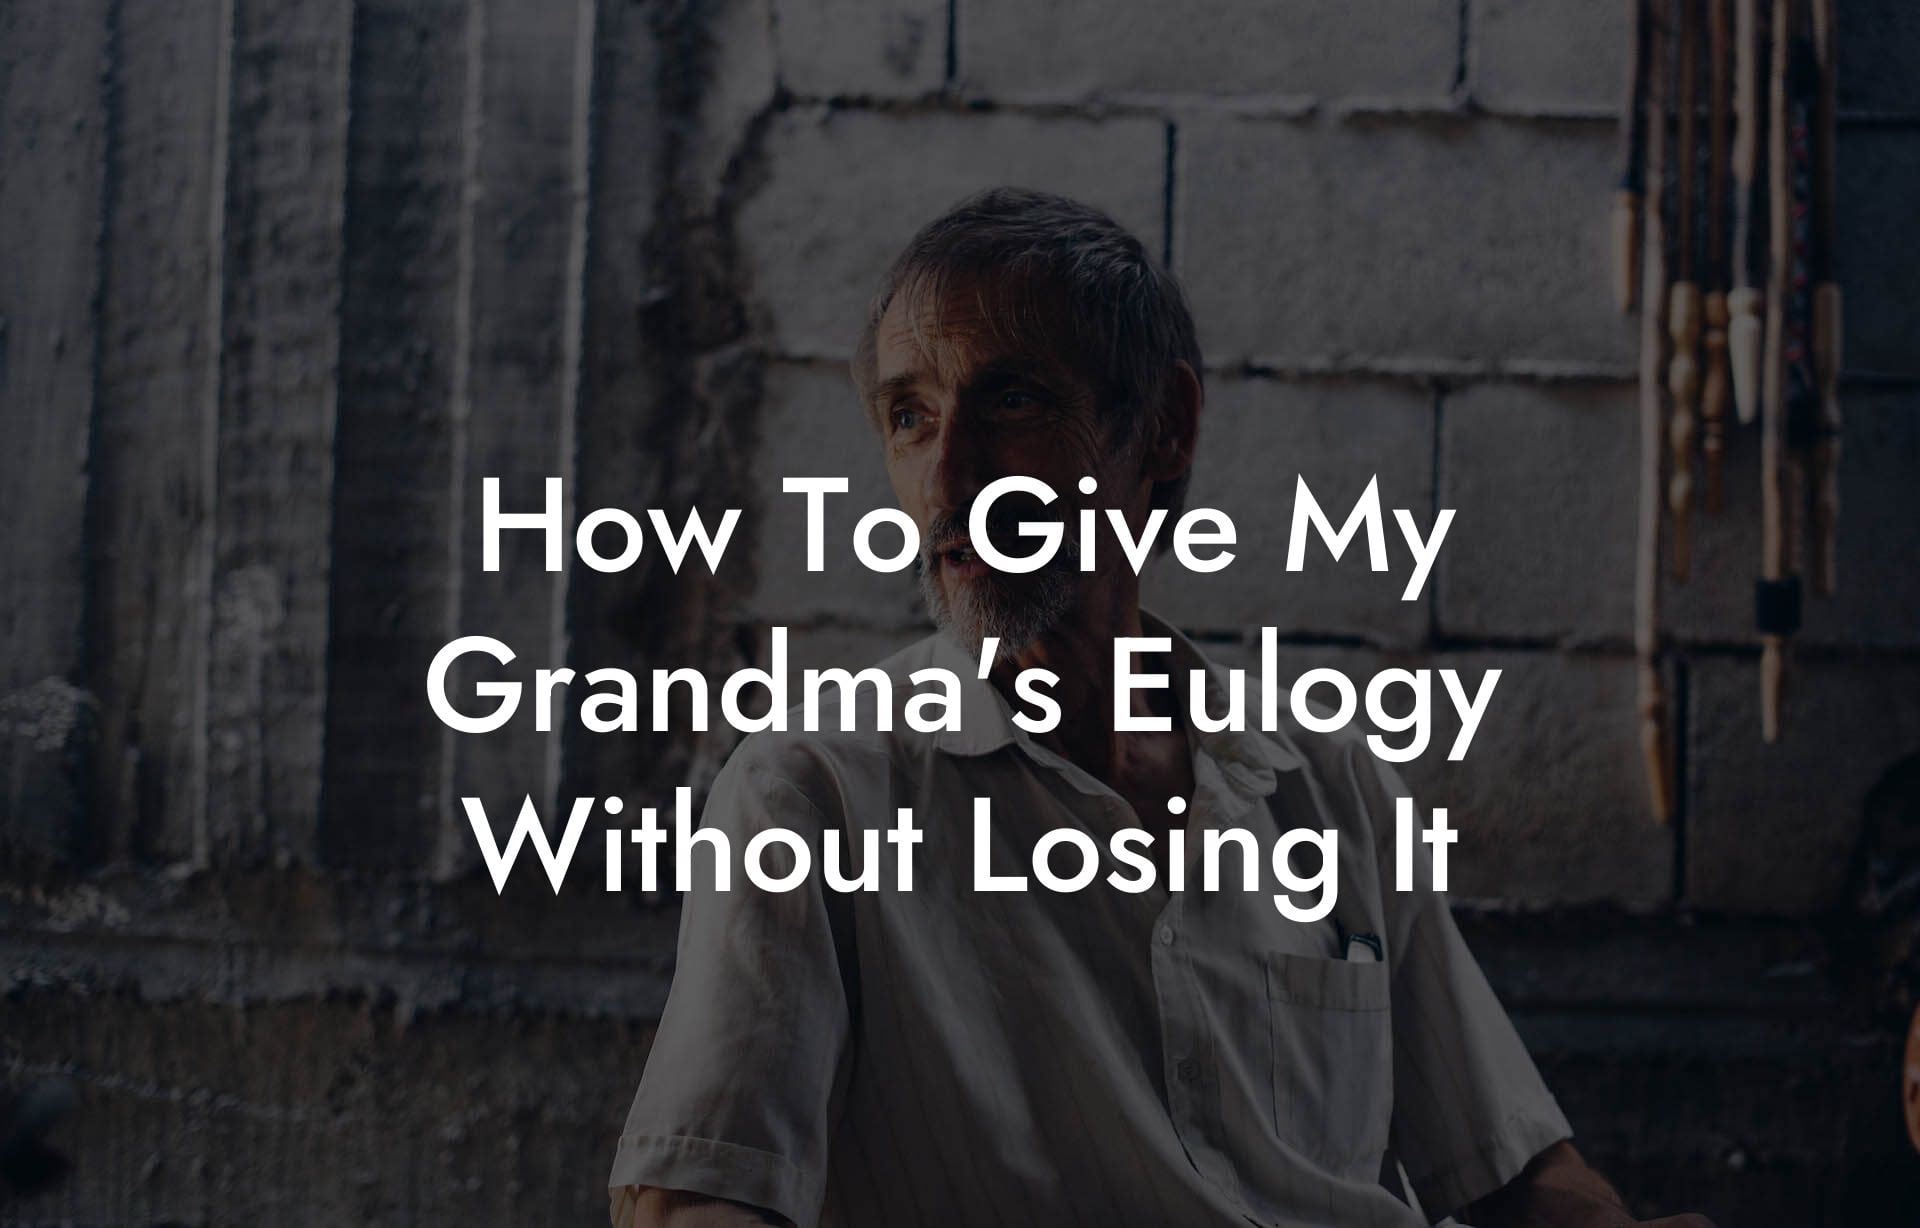 How To Give My Grandma's Eulogy Without Losing It